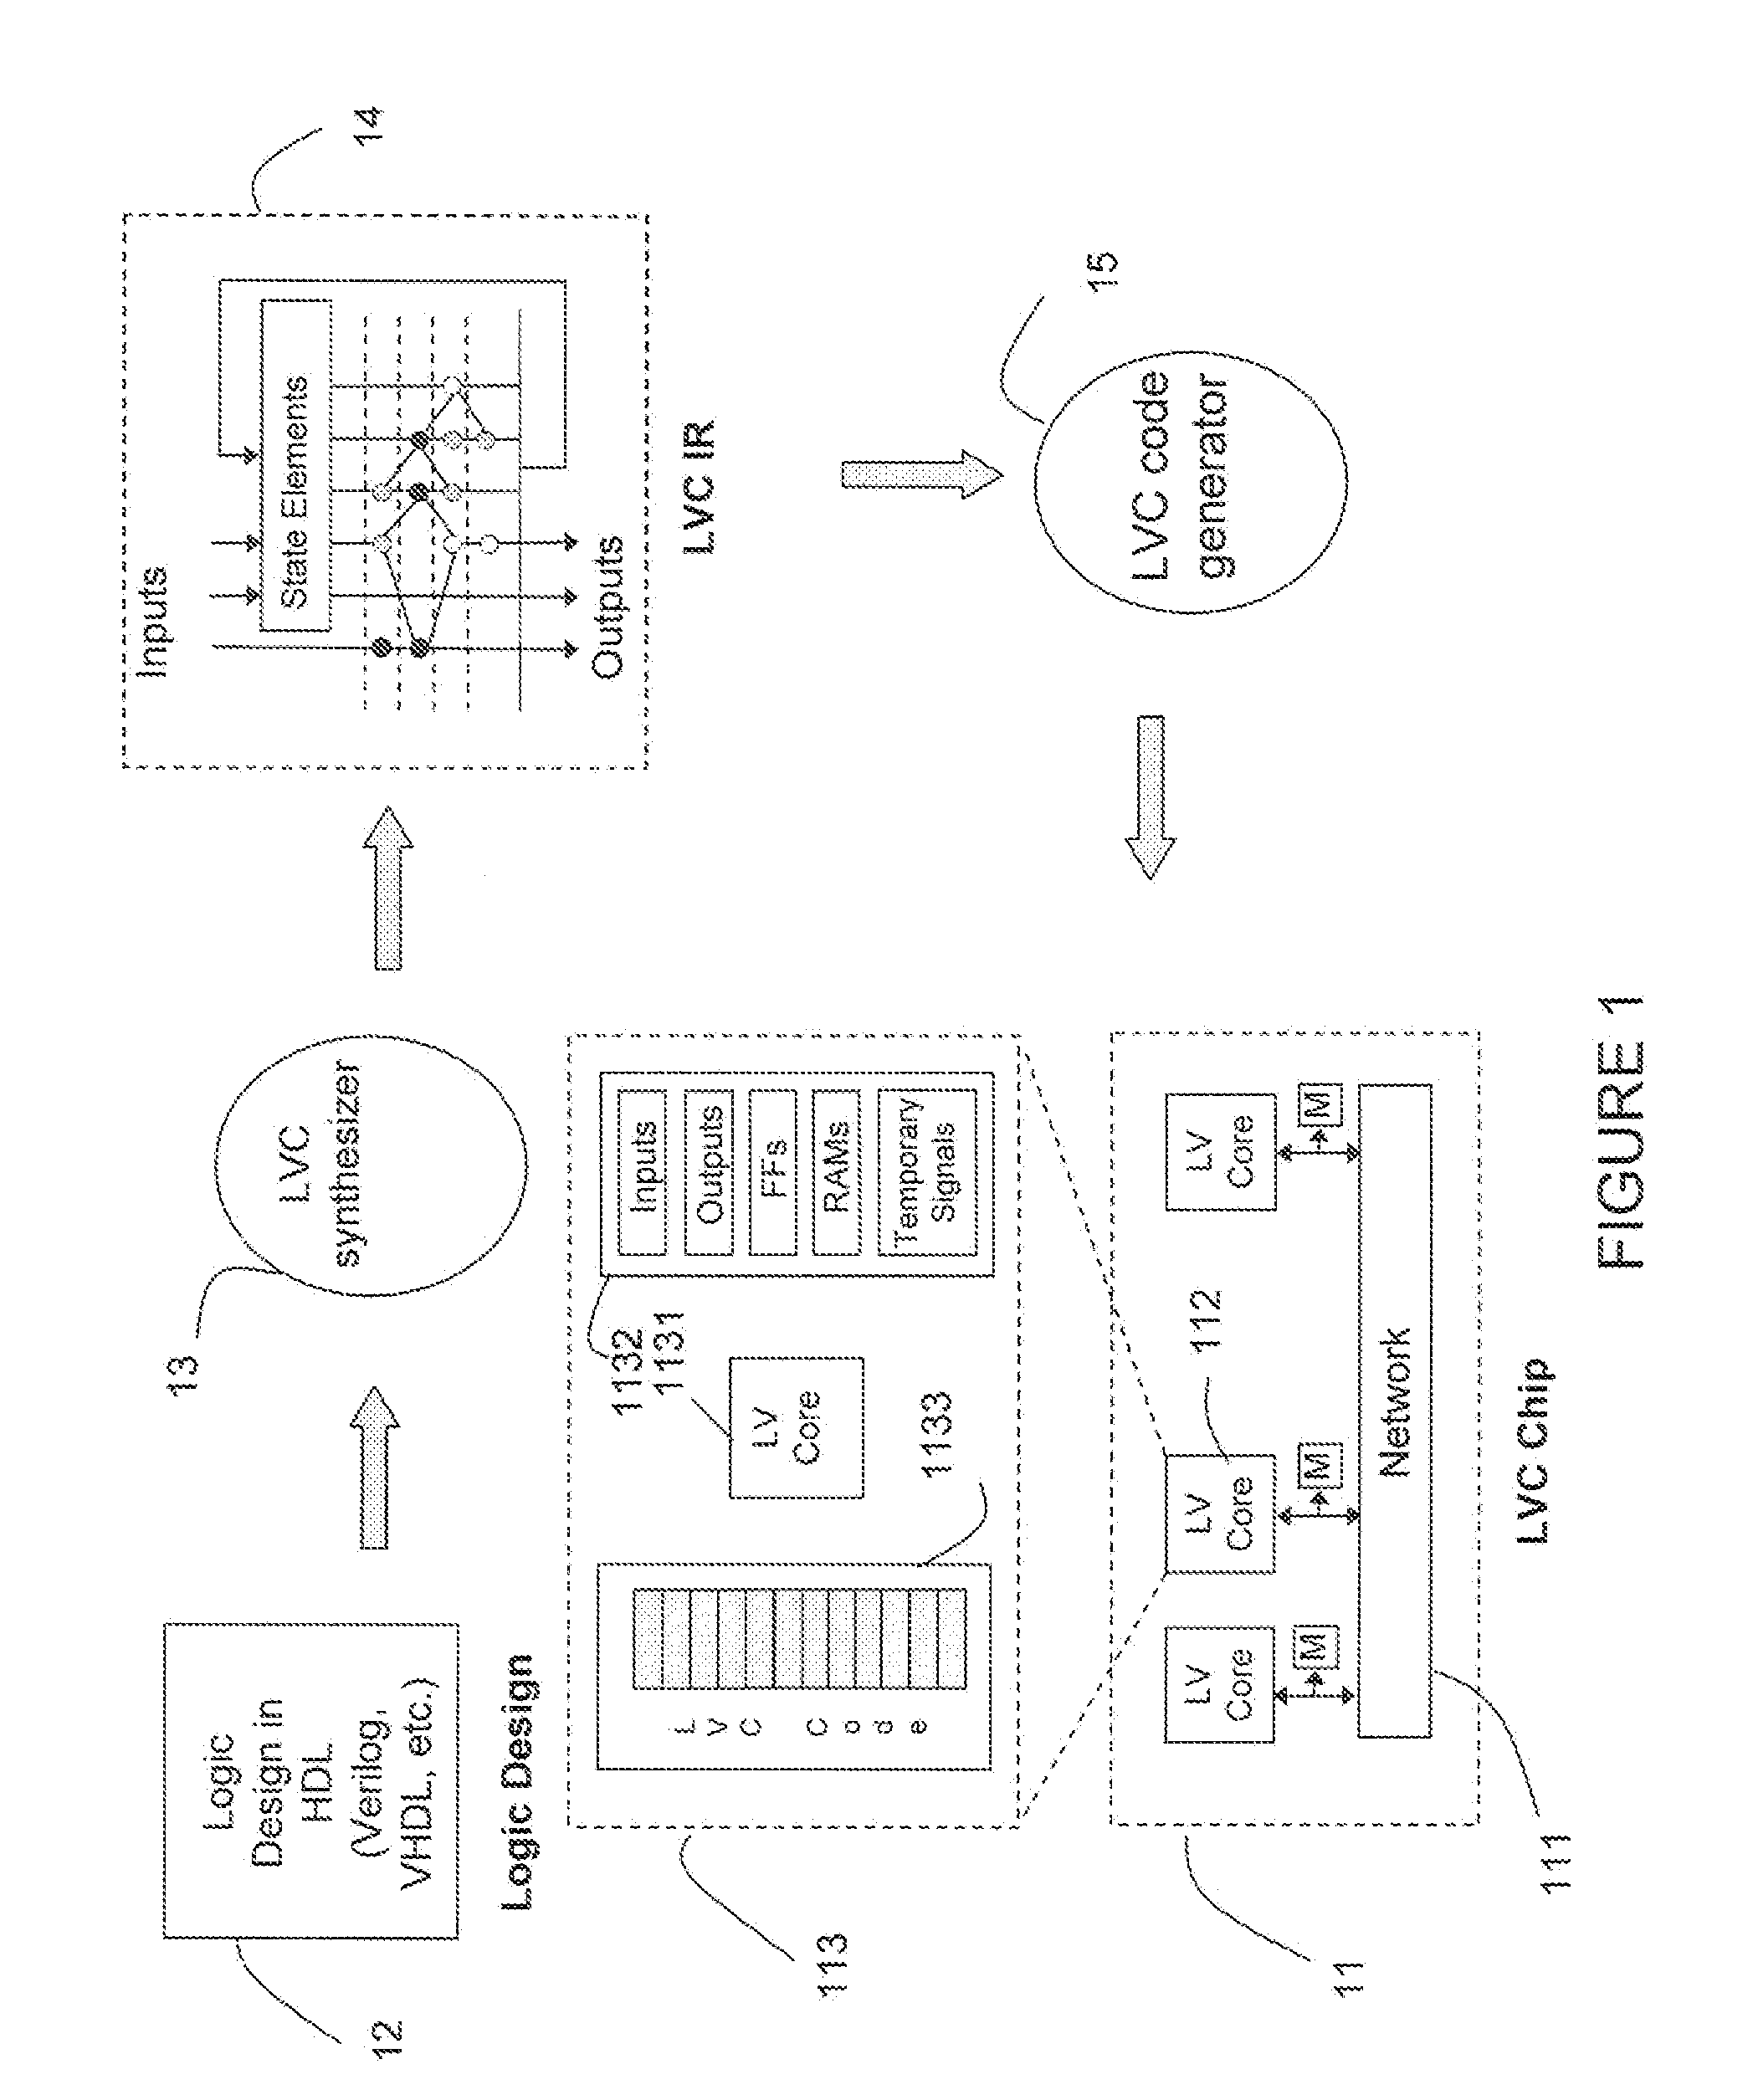 Systems and Methods for Logic Verification